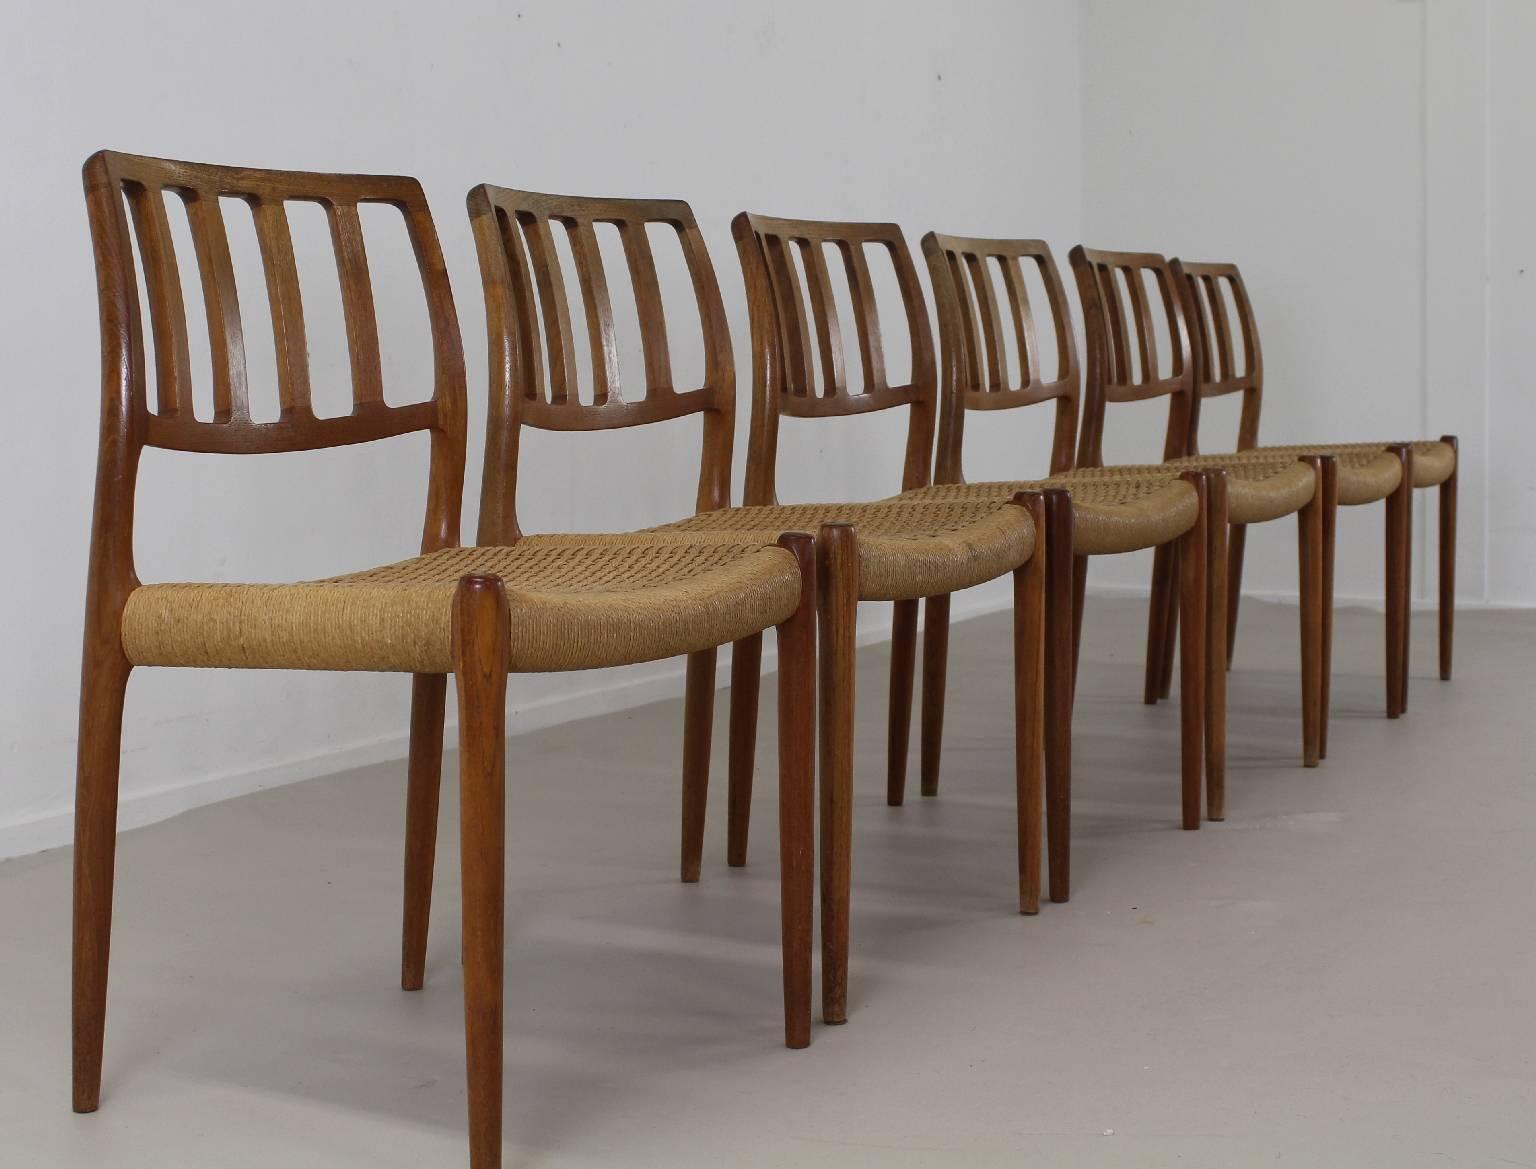 Teakwood chairs with a organic back.
Designed by Niels O. Møller 1974.
Teakwood with original papercord seating.
Marked: J.L. Møller Models.